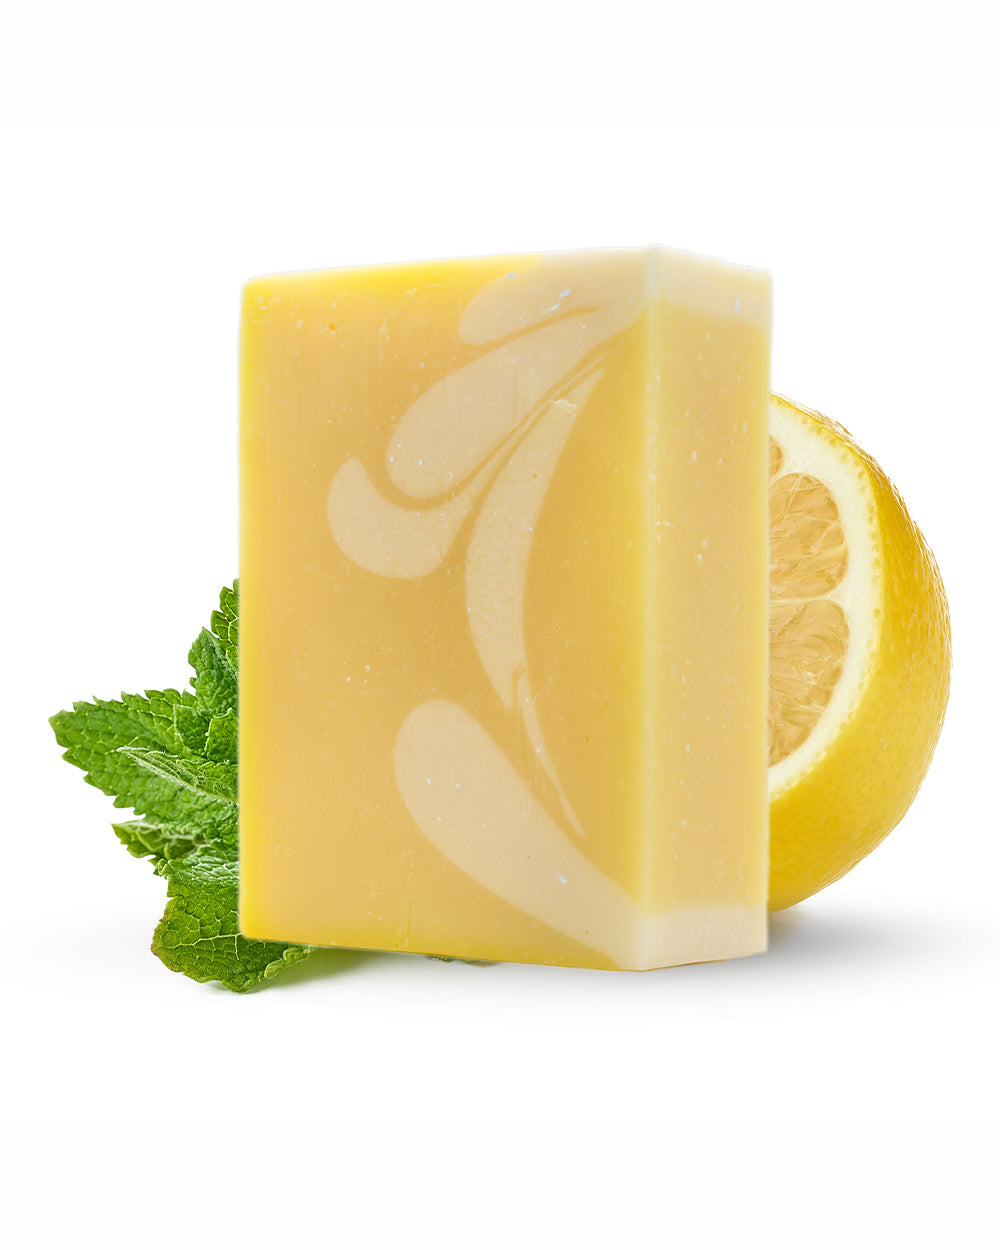 Lemon, citrus limon – The Sudsy Soapery Natural Products, LLC